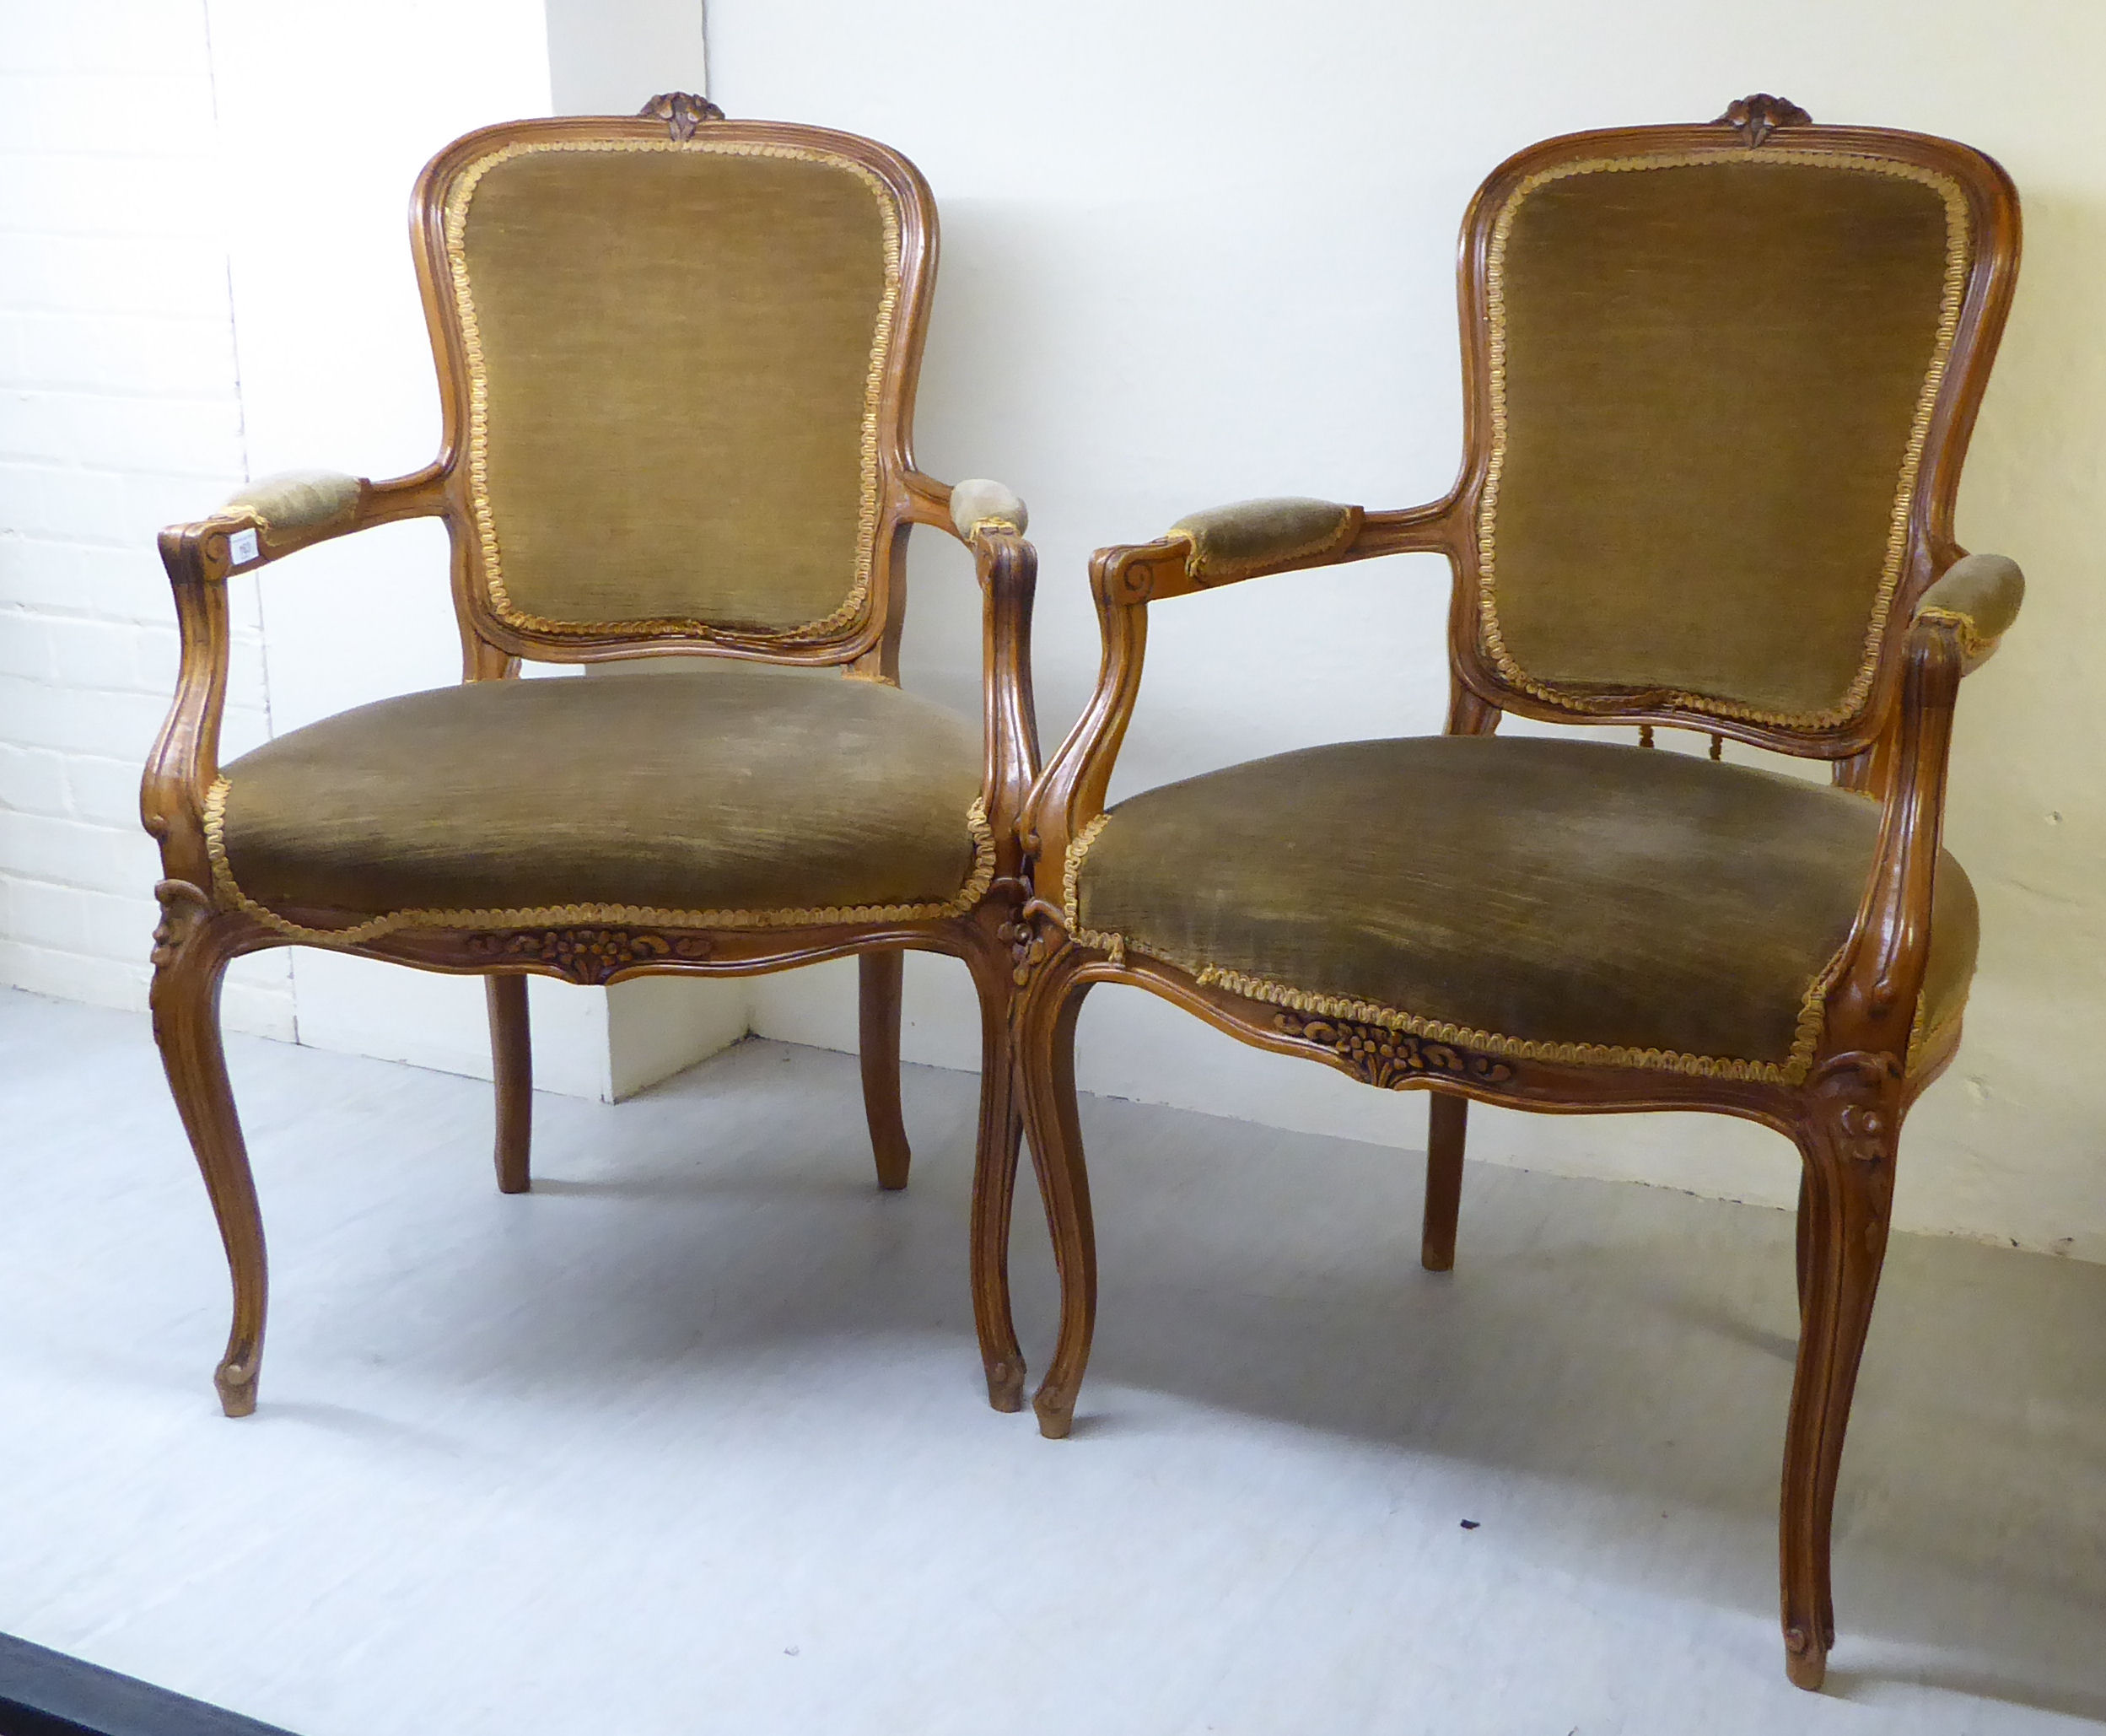 A pair of late 19thC Louis XVI design walnut framed salon chairs, each with a floral carved crest,